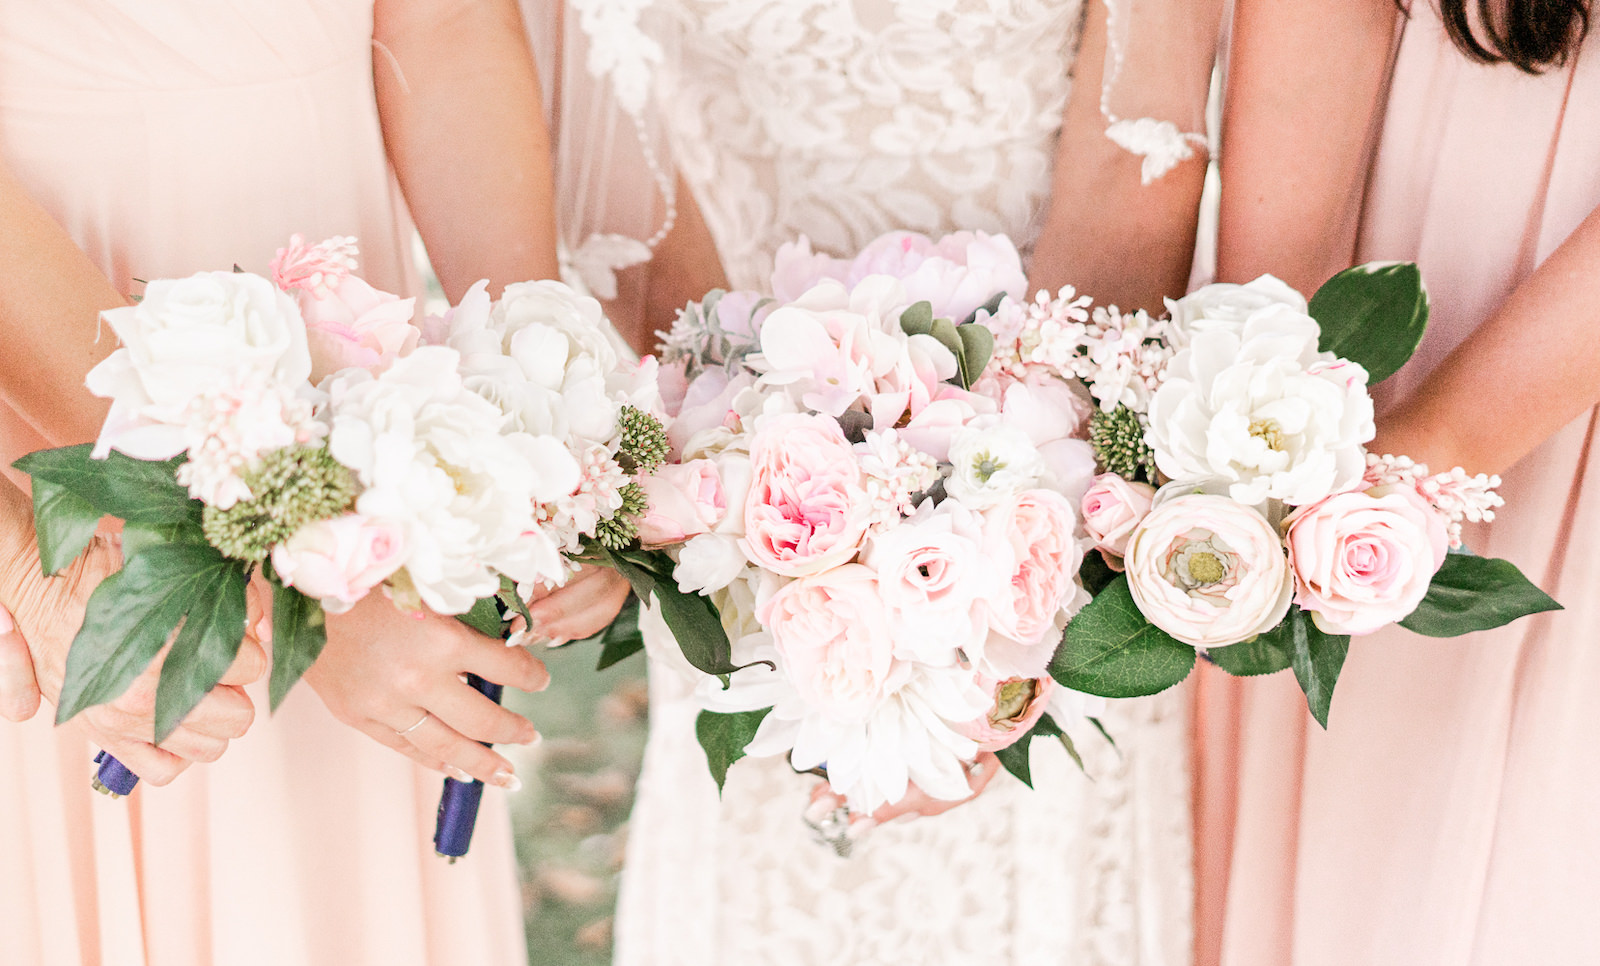 Blush Pink and White Wedding Bouquets with Garden Roses and Ranunculus | Silk Faux Fake Flowers DIY Bouquet